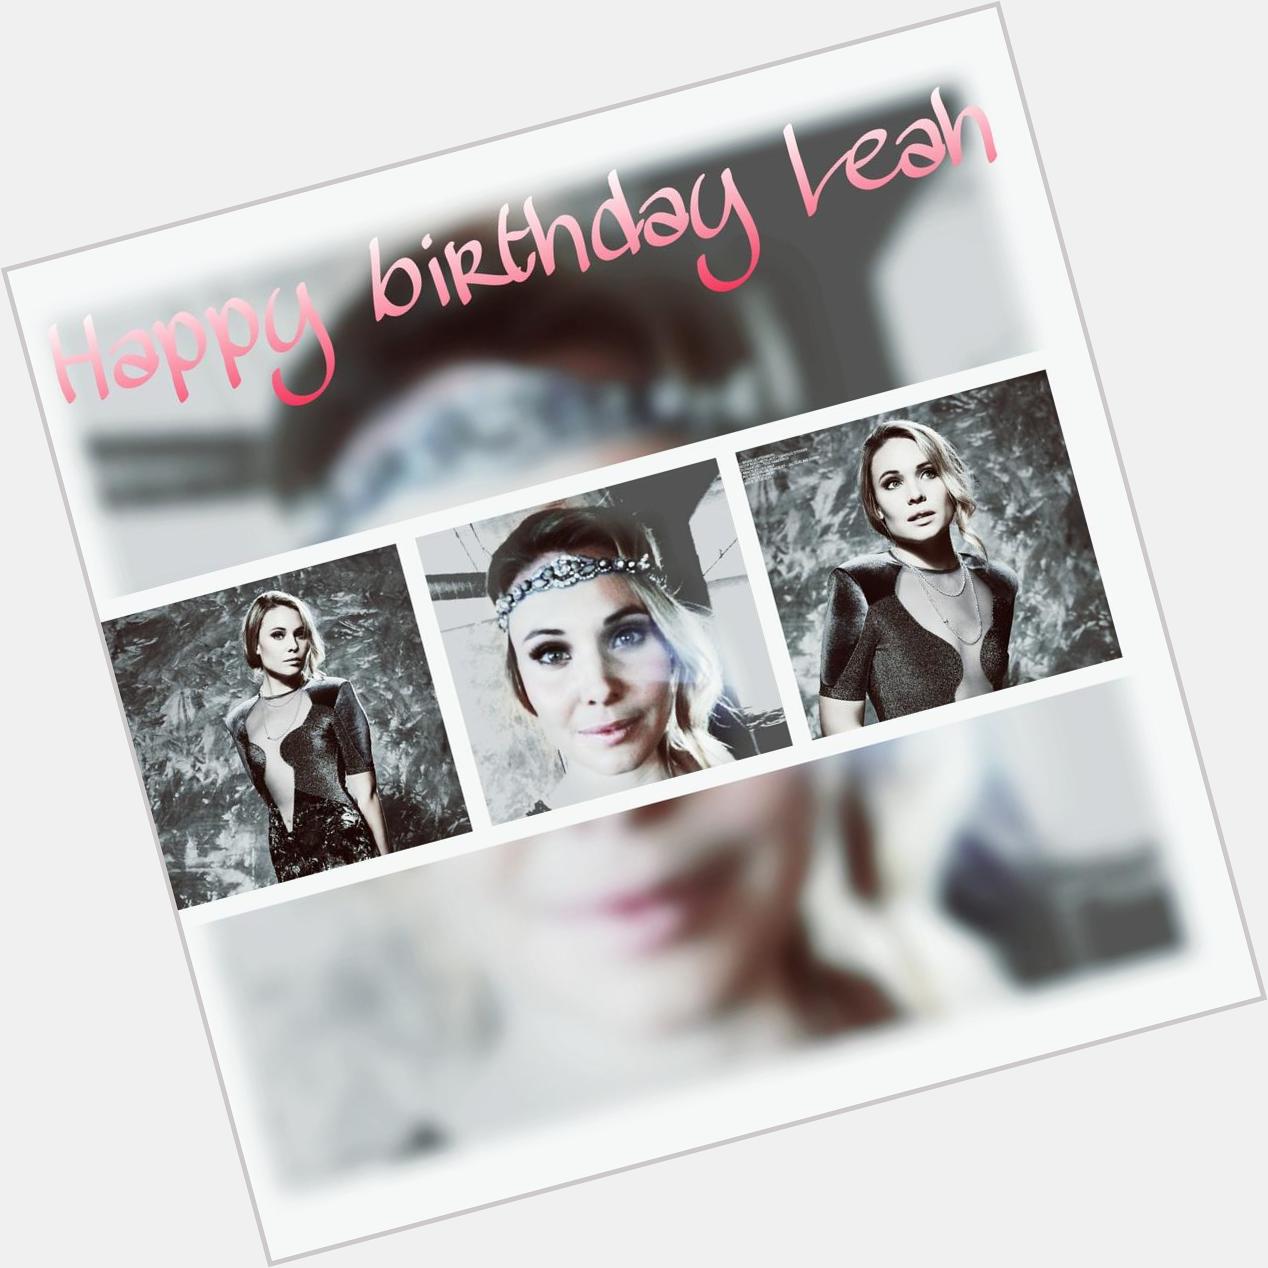 Happy Birthday Leah Pipes Love you 